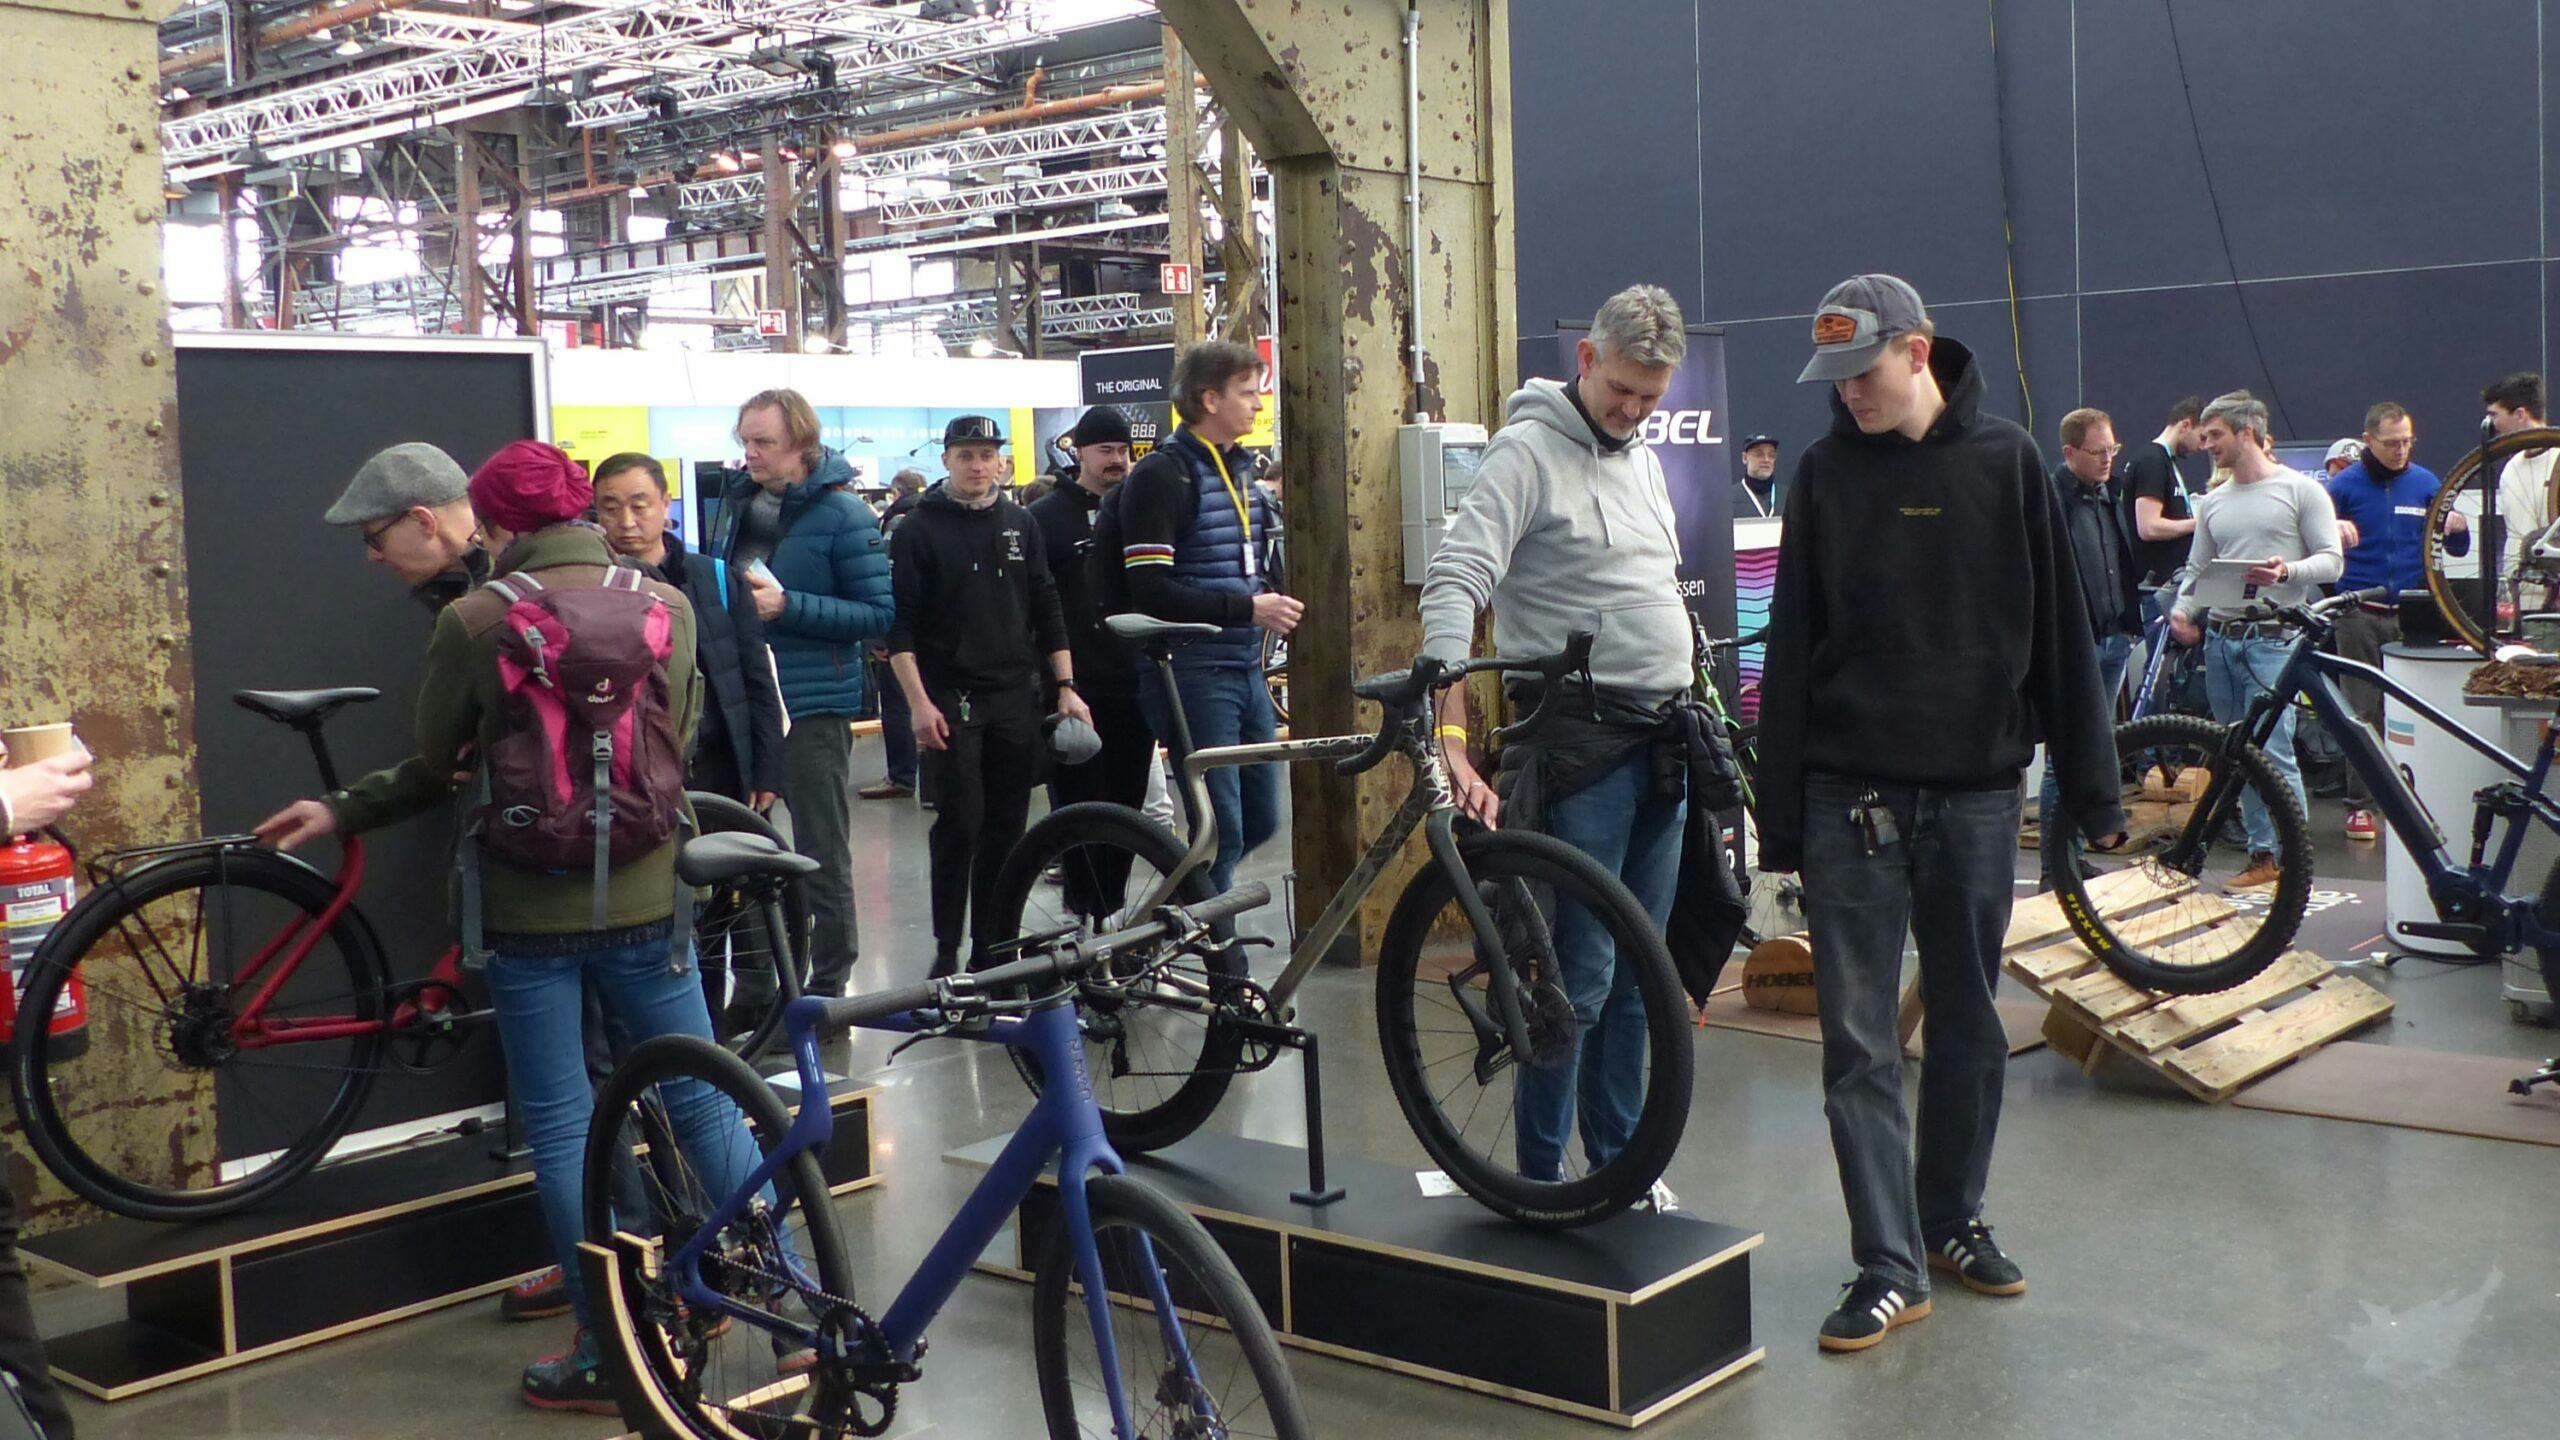 The consumer show has not been affected by the negative tendencies in the market. – Photo Bike Europe